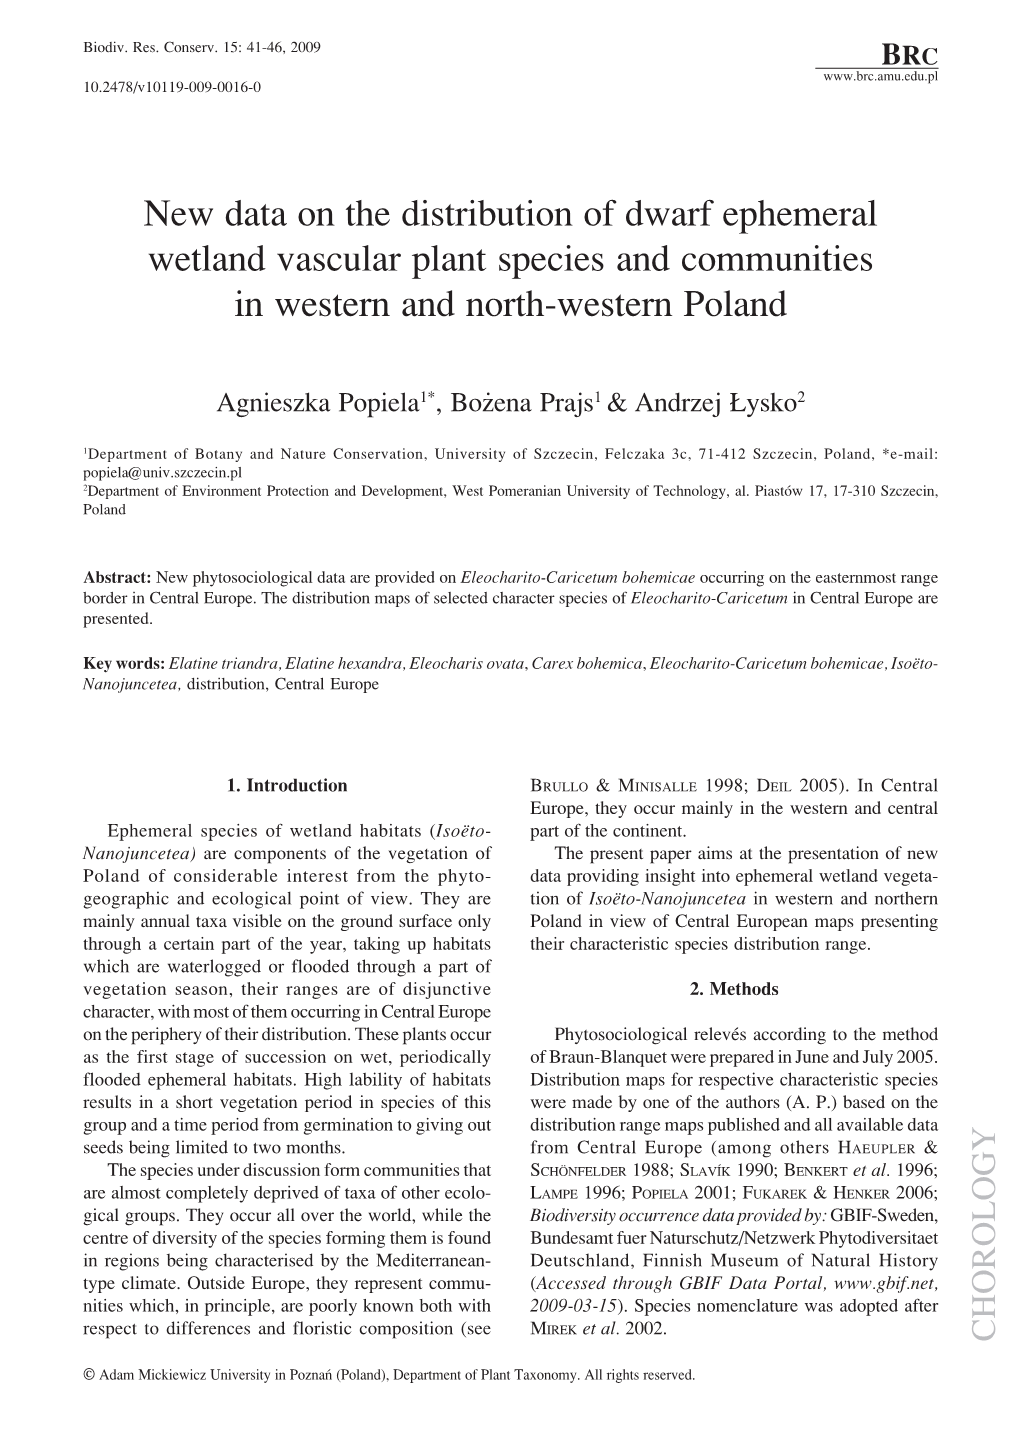 New Data on the Distribution of Dwarf Ephemeral Wetland Vascular Plant Species and Communities in Western and North-Western Poland